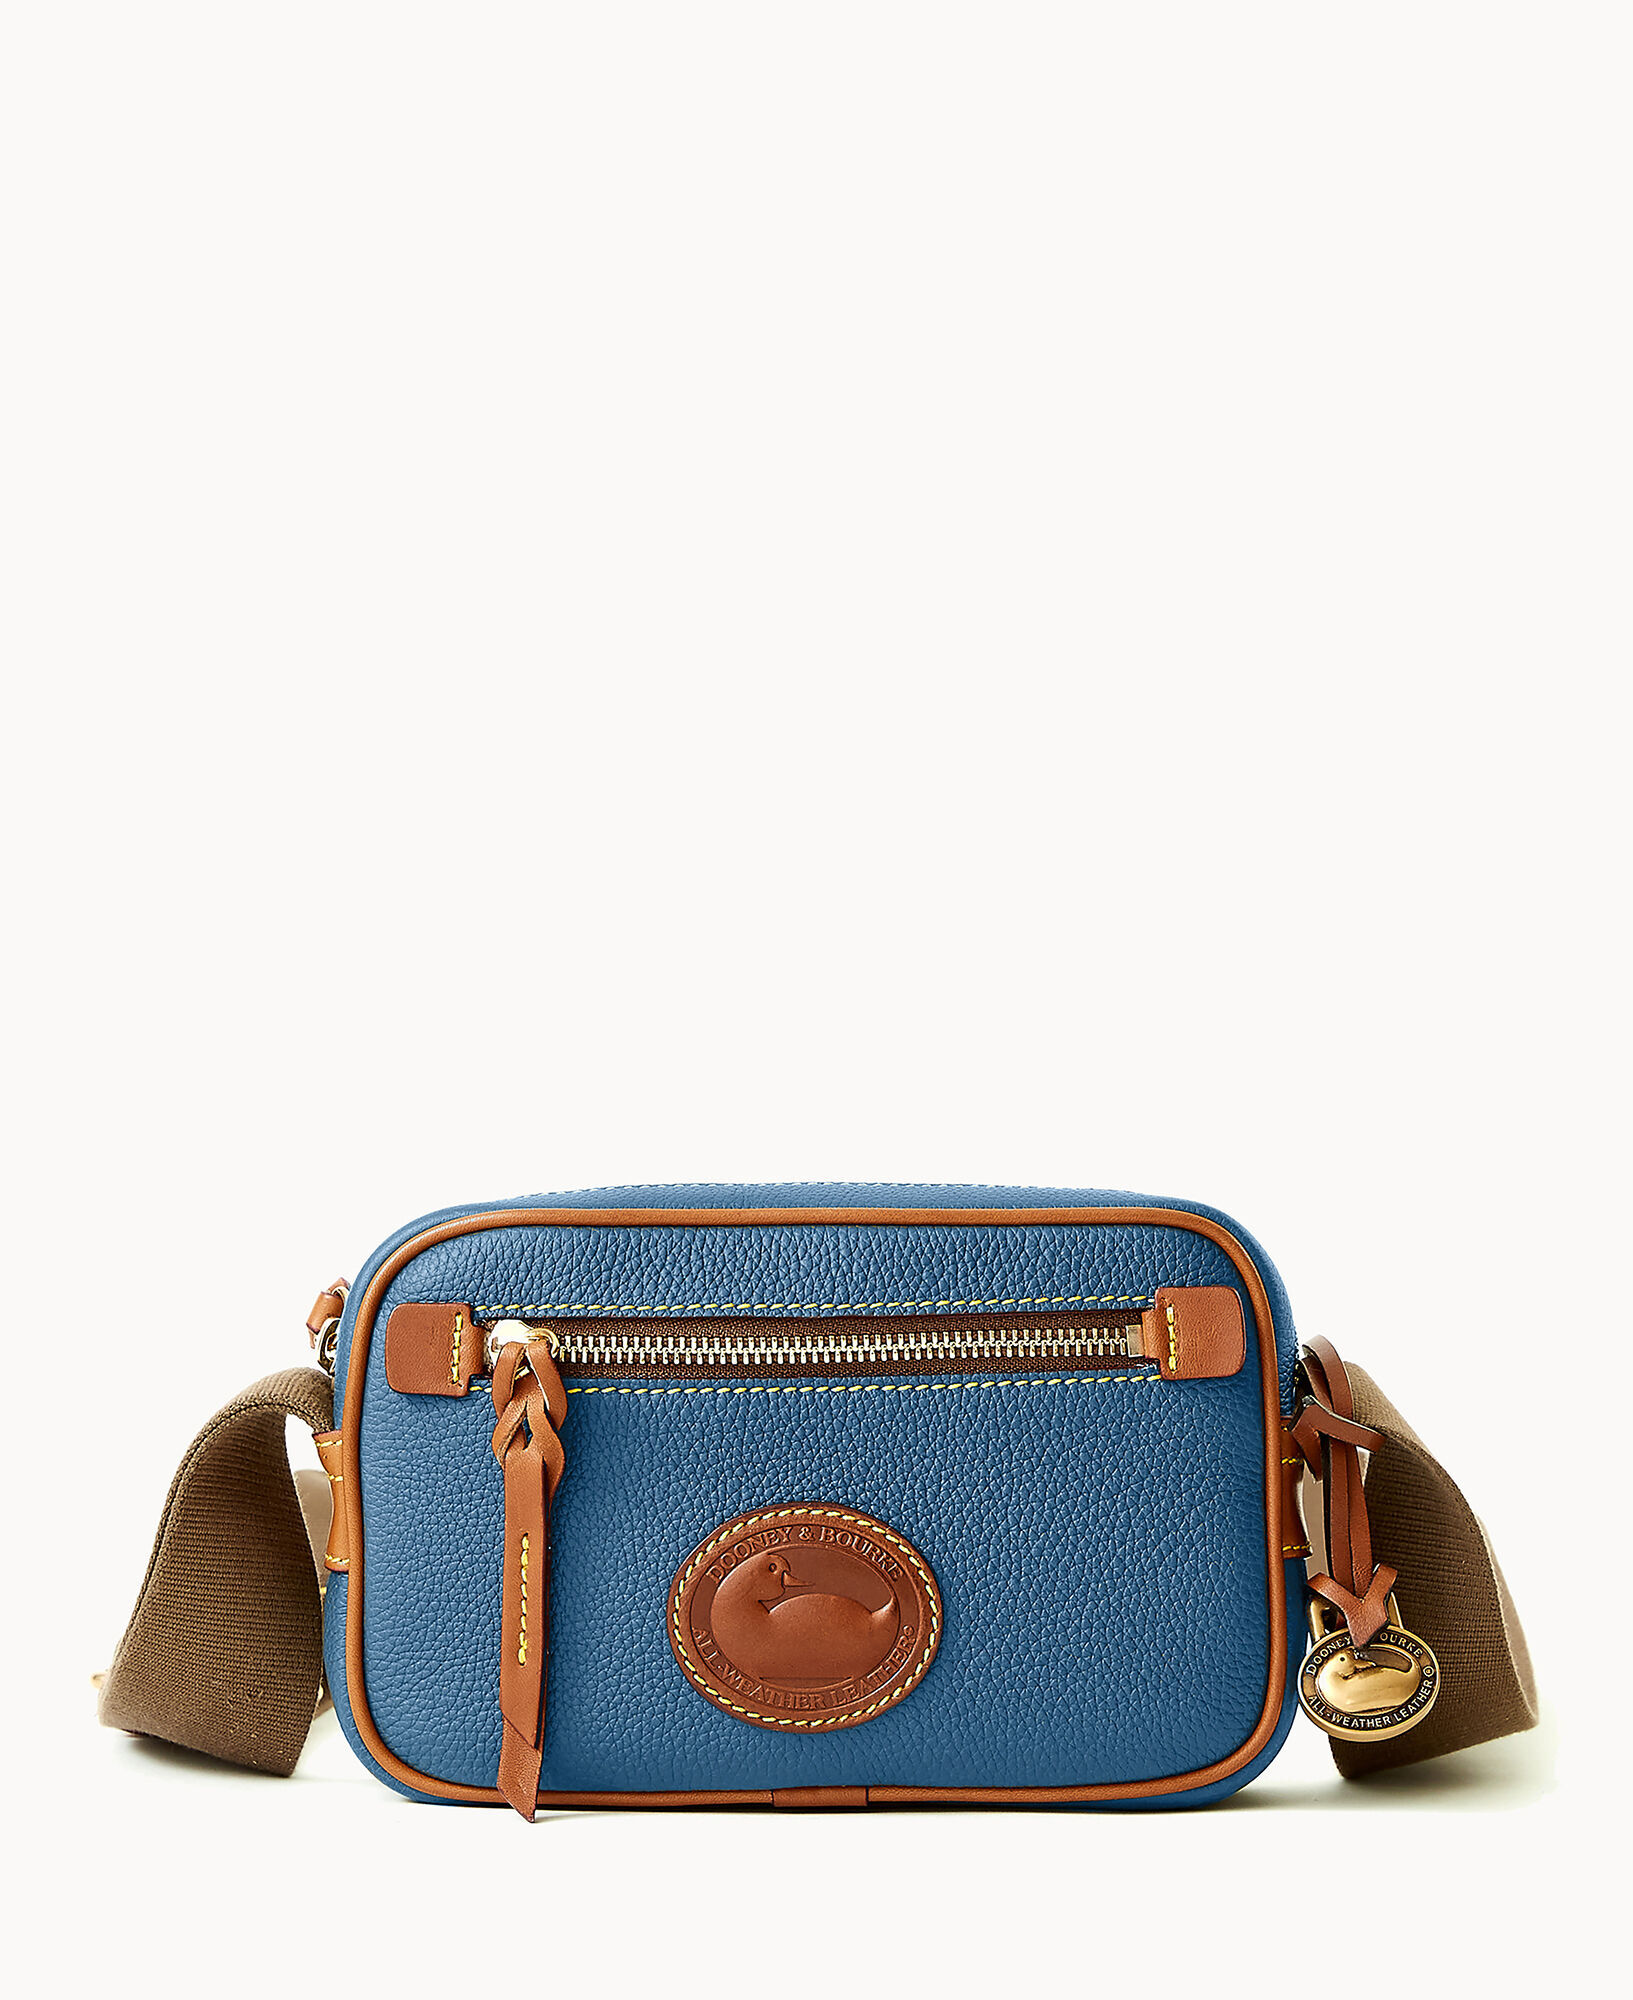 New Arrival Printed Women's Crossbody Bag With Large Capacity, Brown &  Contrast Color, Suitable For Large Phone And Coins